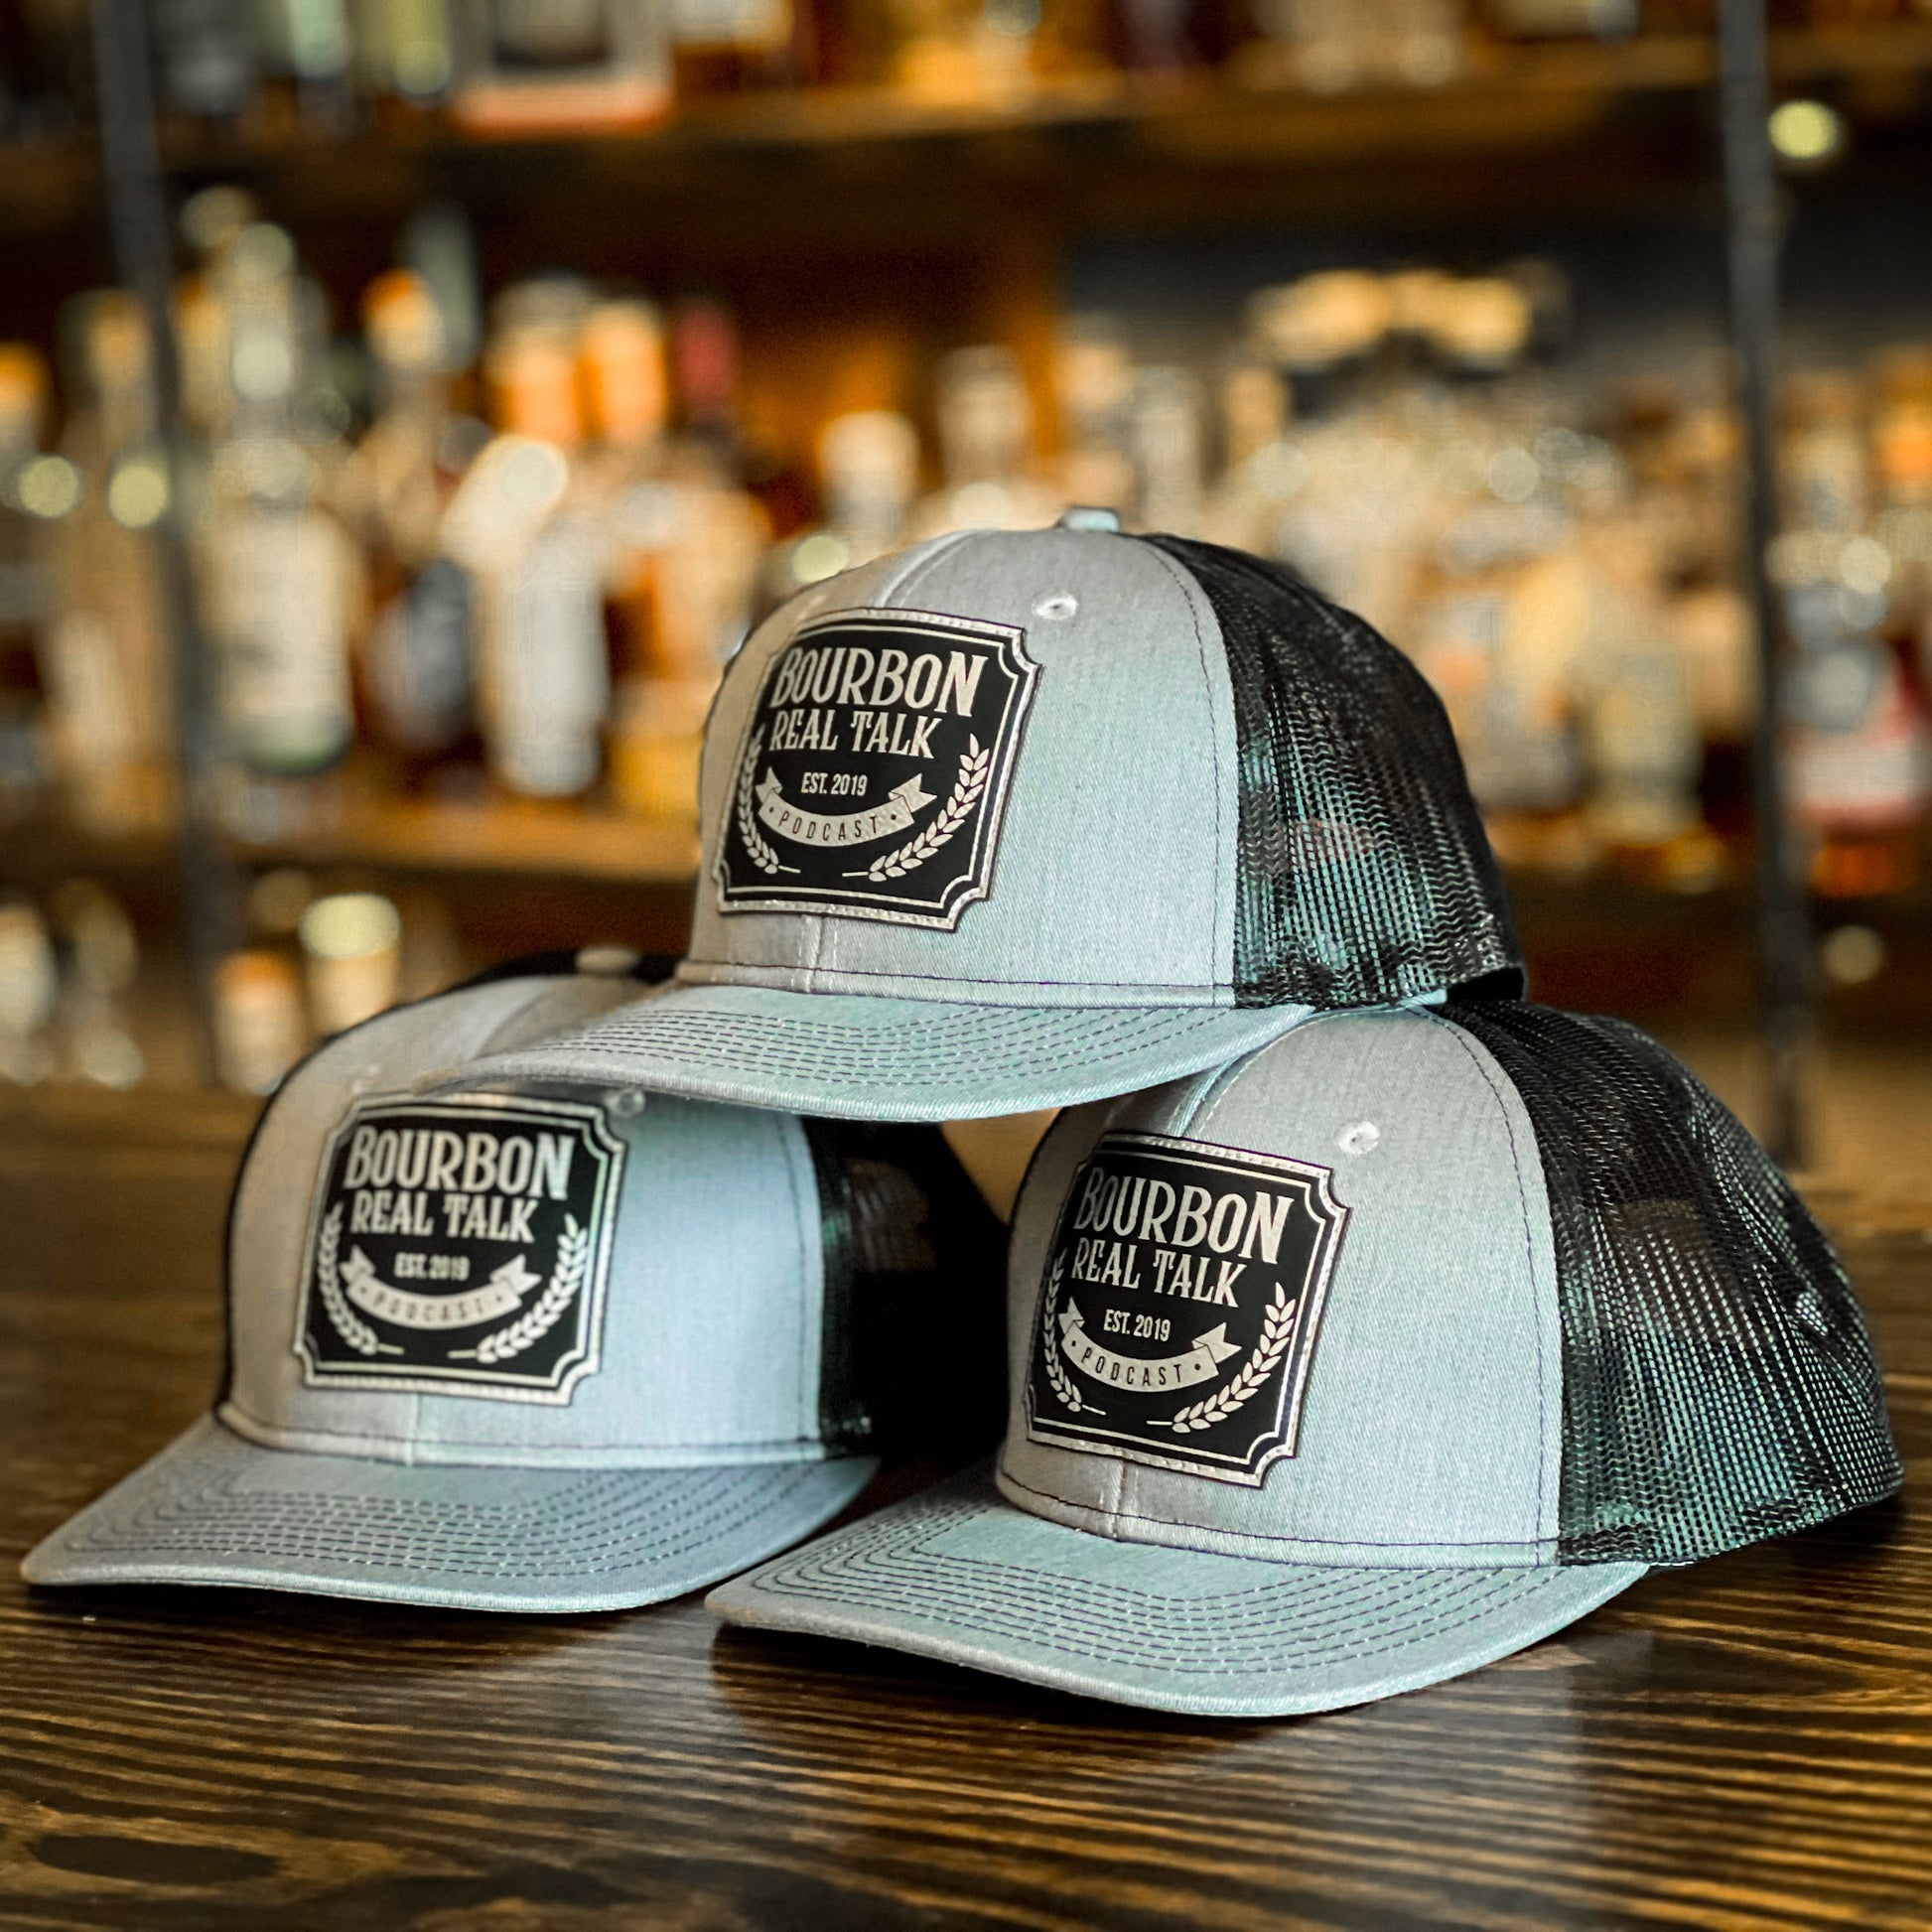 photo shows a stack of three structured trucker hats with a laser etched leaher patch, shown from side.